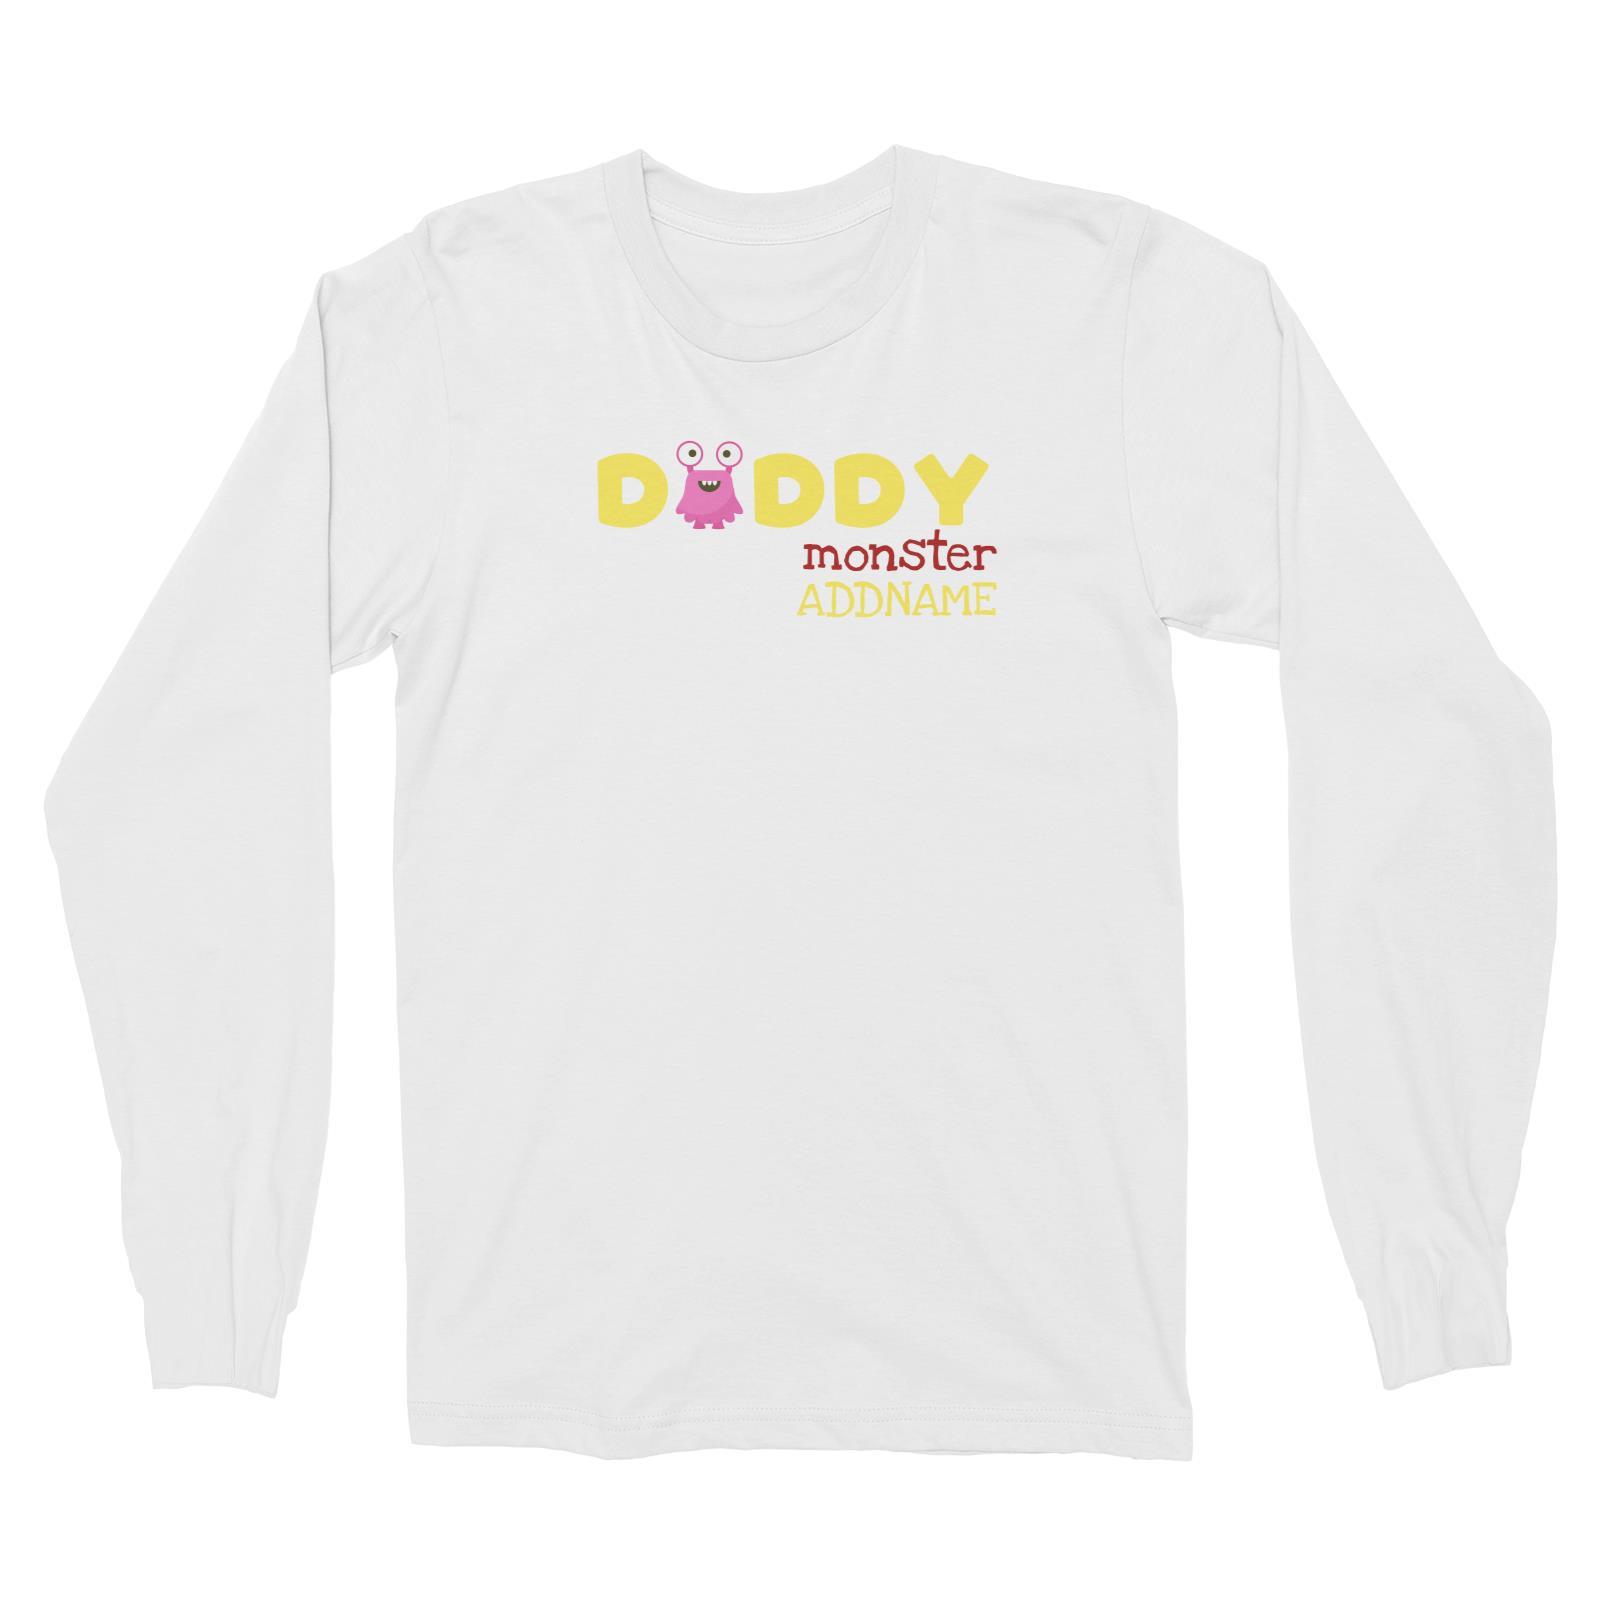 Pink Daddy Monster Addname Long Sleeve Unisex T-Shirt